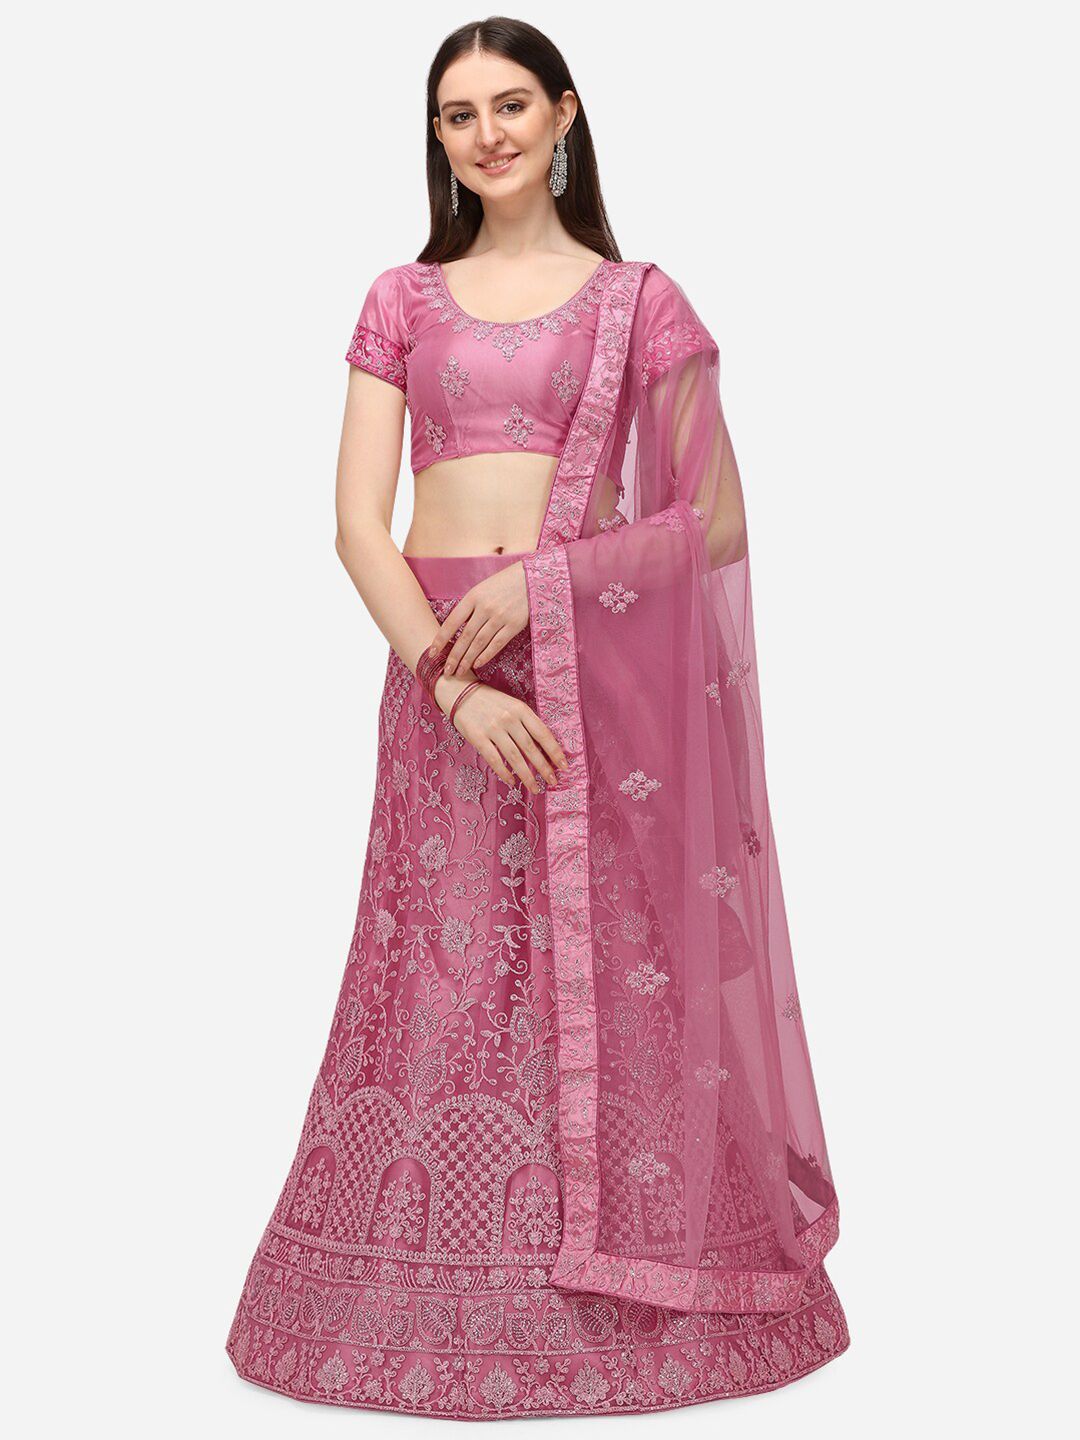 V SALES Pink Embroidered Sequinned Semi-Stitched Lehenga Choli Price in India